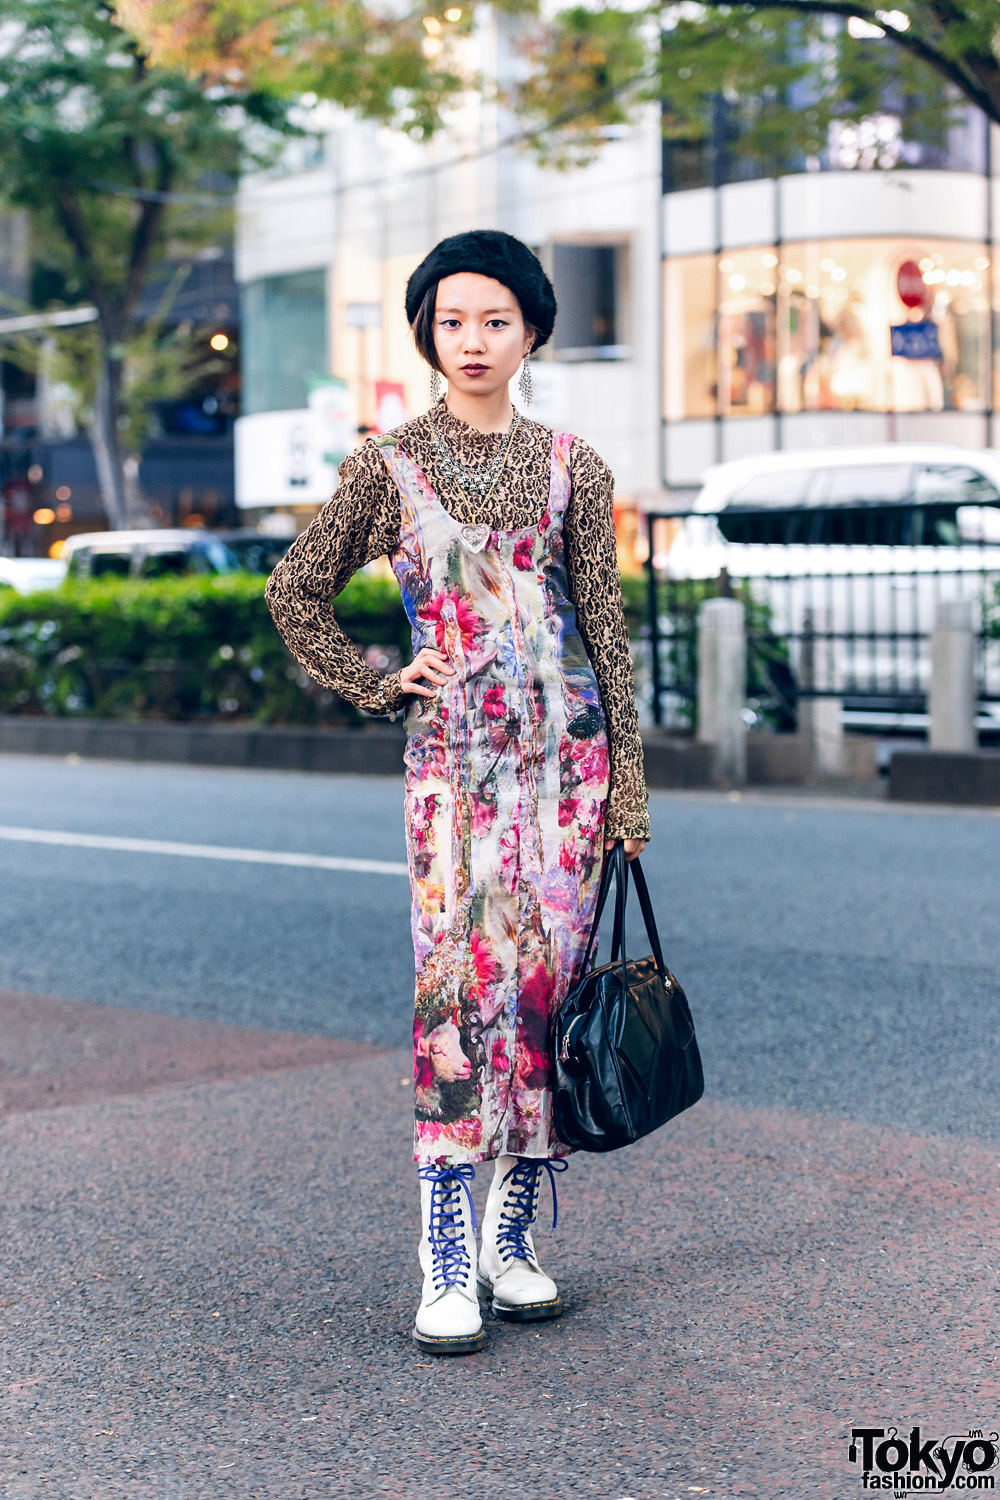 Eclectic Tokyo Street Style w/ Furry Beret, Rhinestone Earrings, The Four-Eyed Textured Top, Gauntlett Cheng Floral Dress, Vivienne Westwood Handbag & Dr. Martens Boots